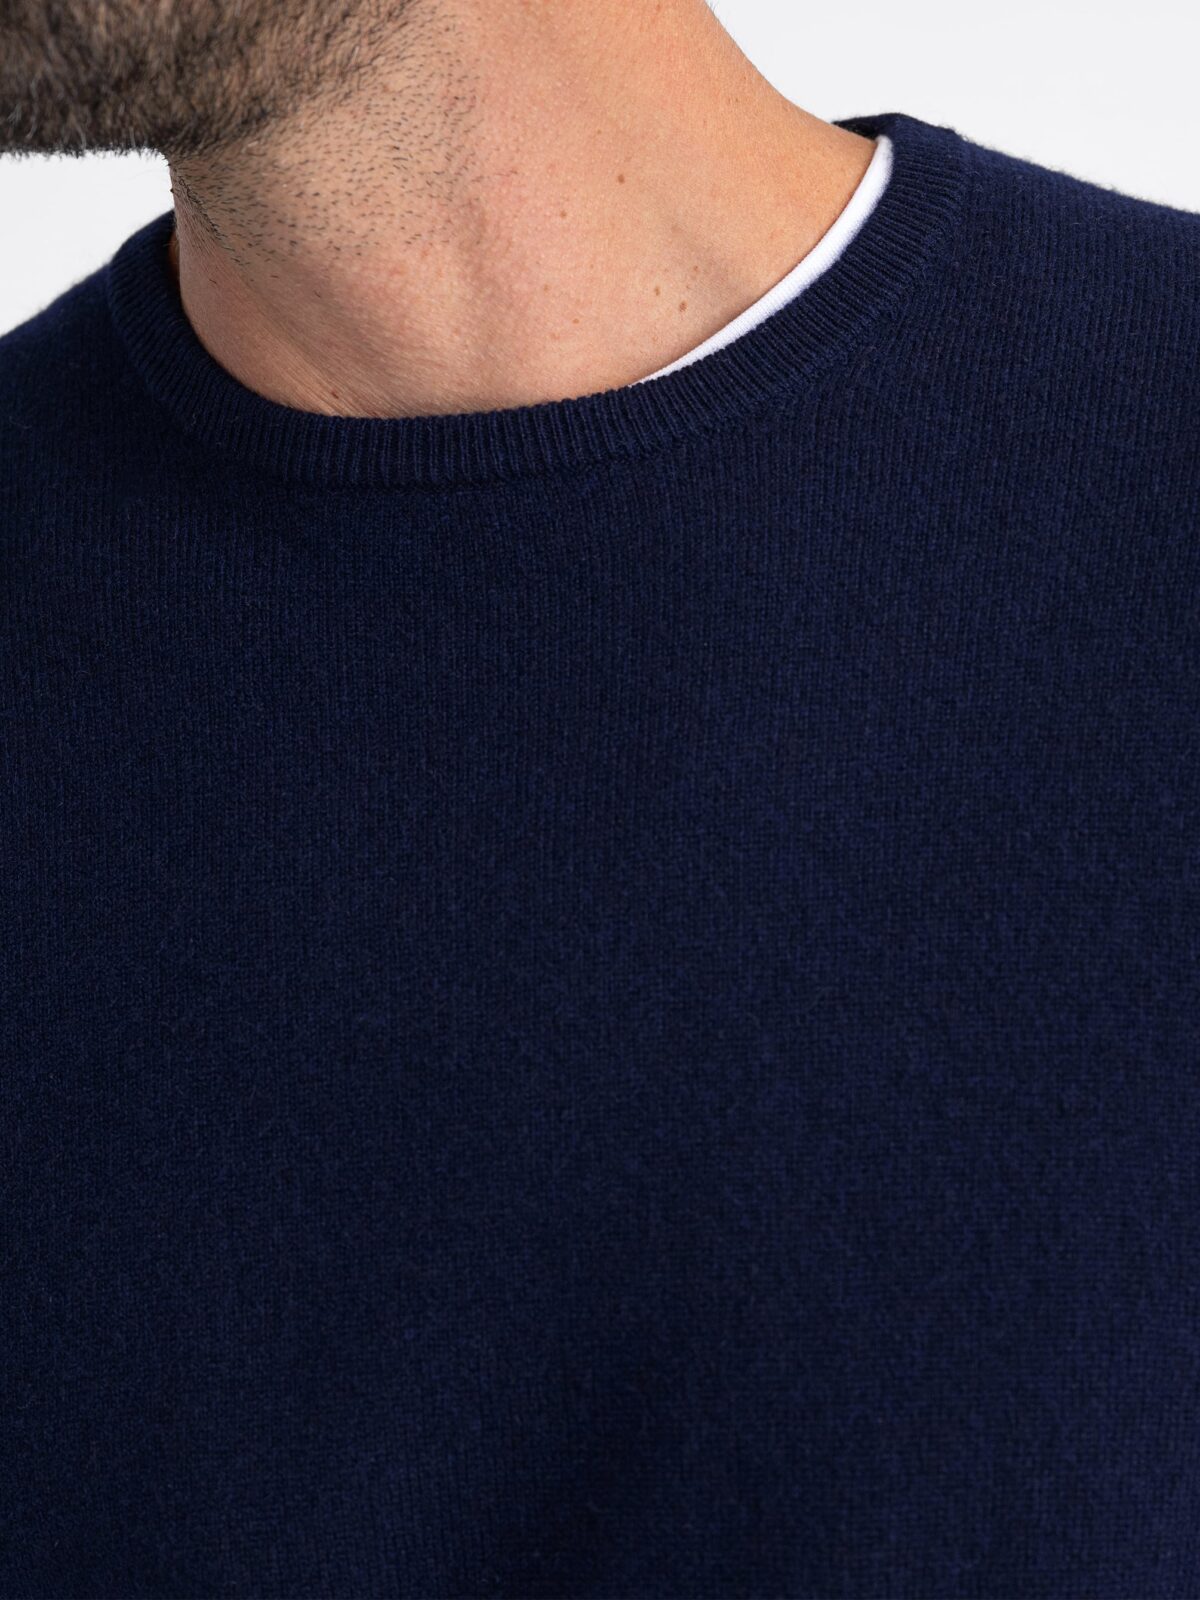 Navy Cashmere Crewneck Sweater by Proper Cloth